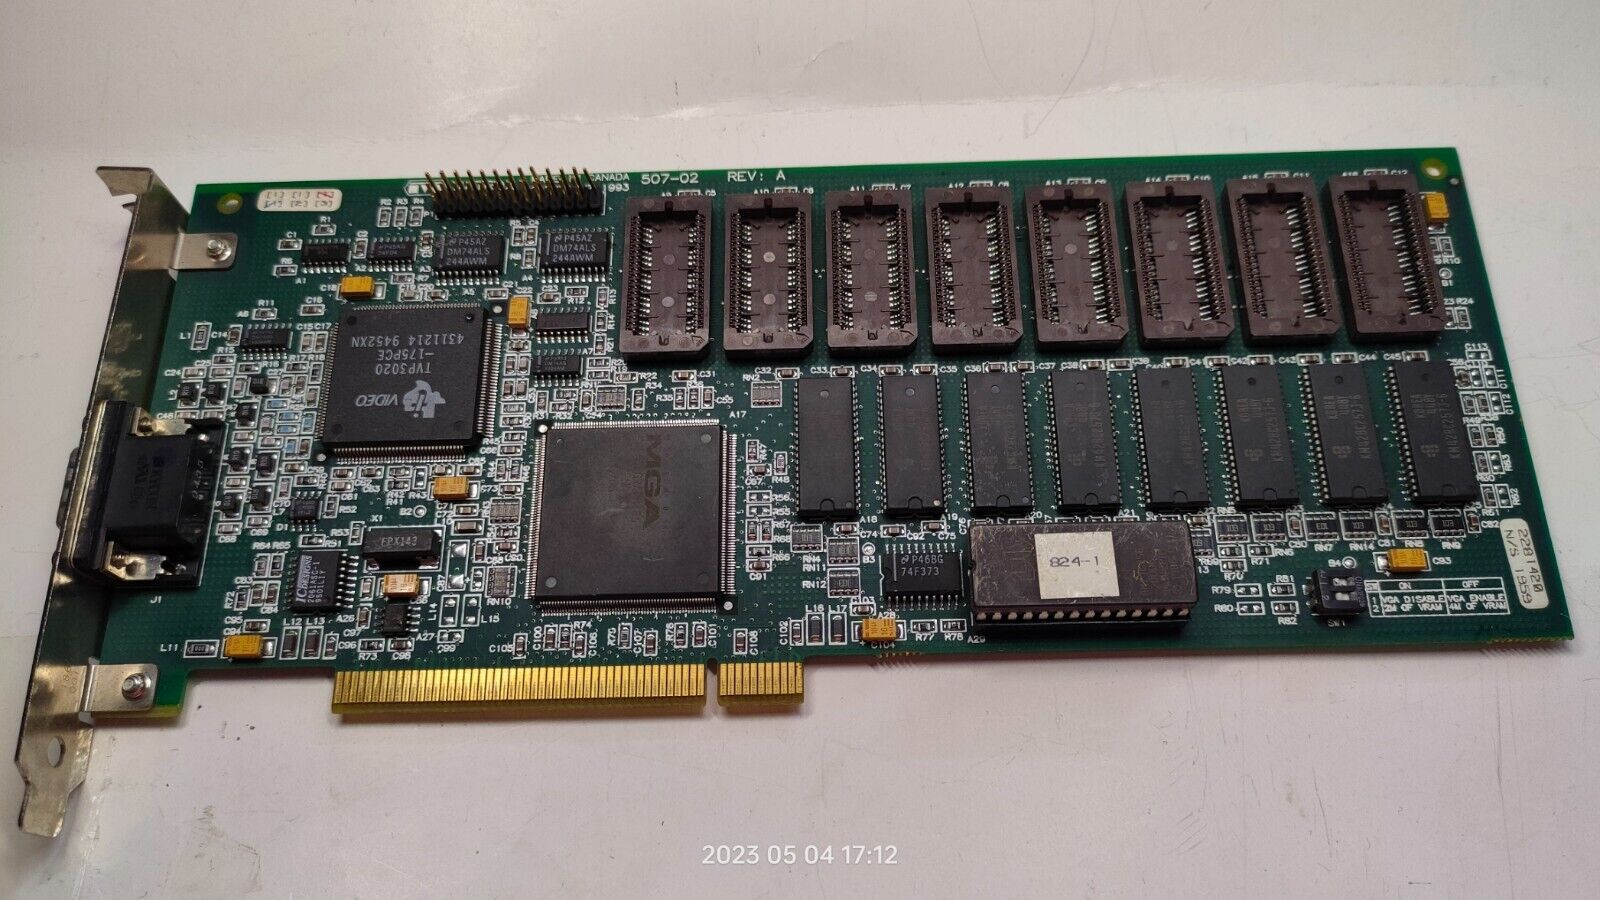 RARE PCI VGA Matrox Ultima Plus (507-02) with IS-ATHENA R1 chip, 30 year old 